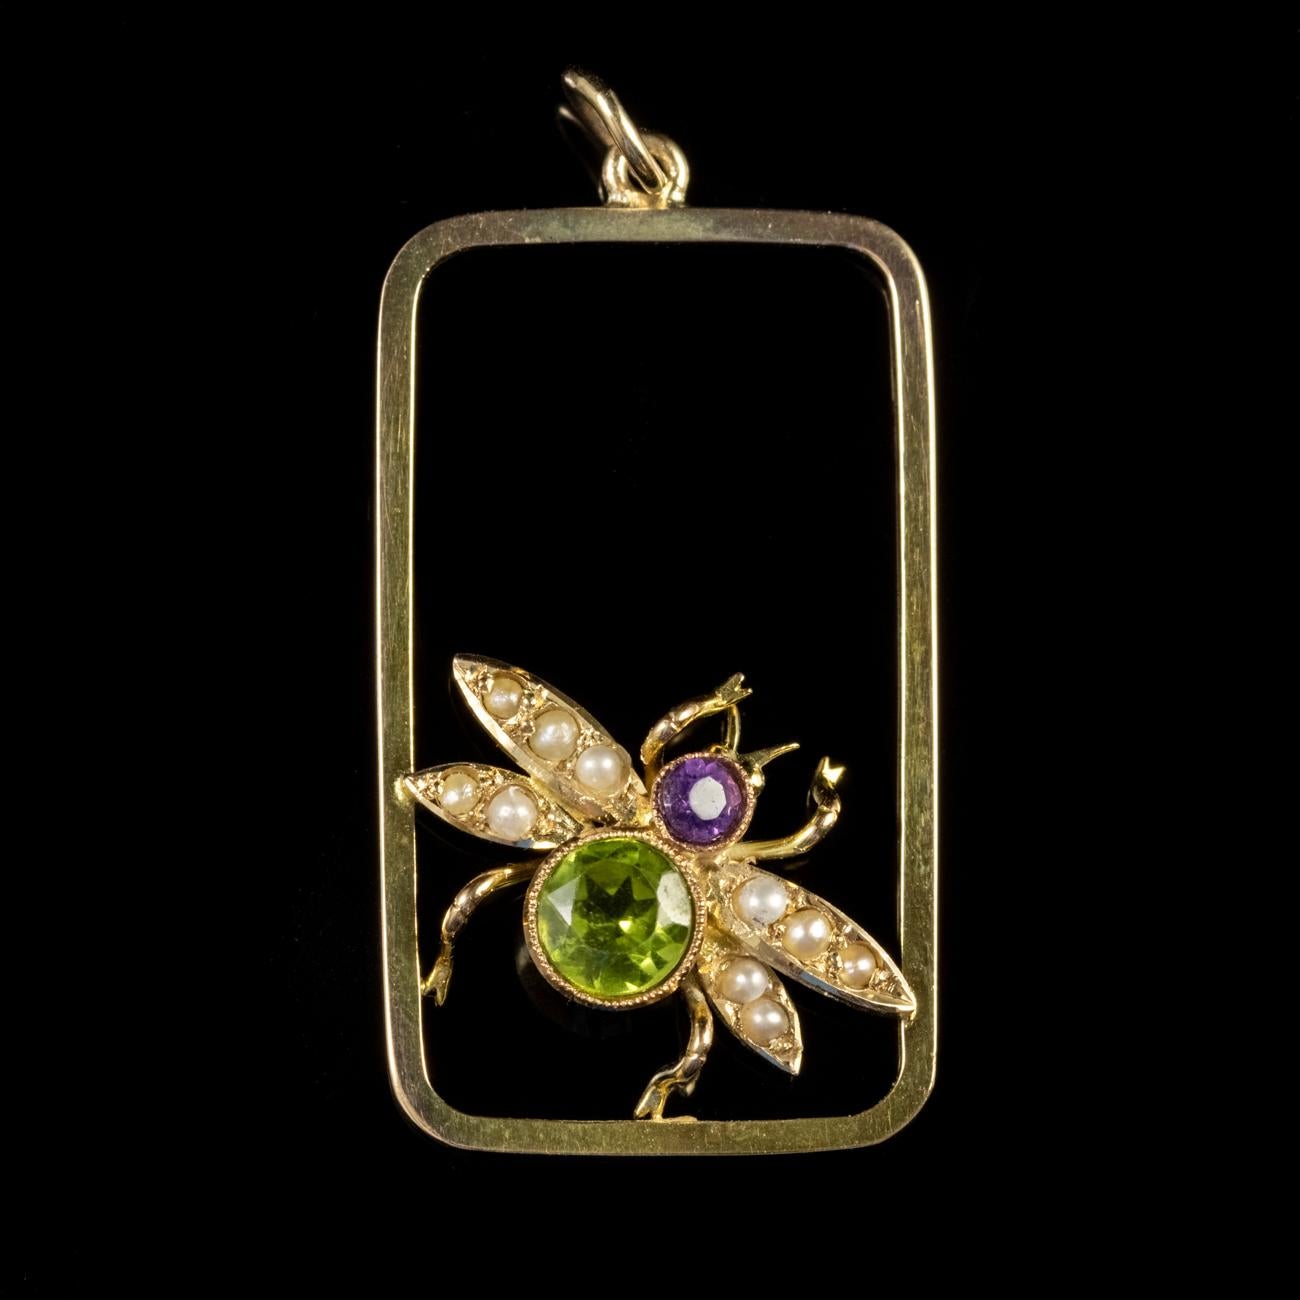 This delightful Antique Edwardian Suffragette pendant has been modelled in 9ct Yellow Gold and features the form of bee. The body of the bee is set with a lovely Peridot which weighs approx. 0.50ct and the head of the bee is set with an Amethyst